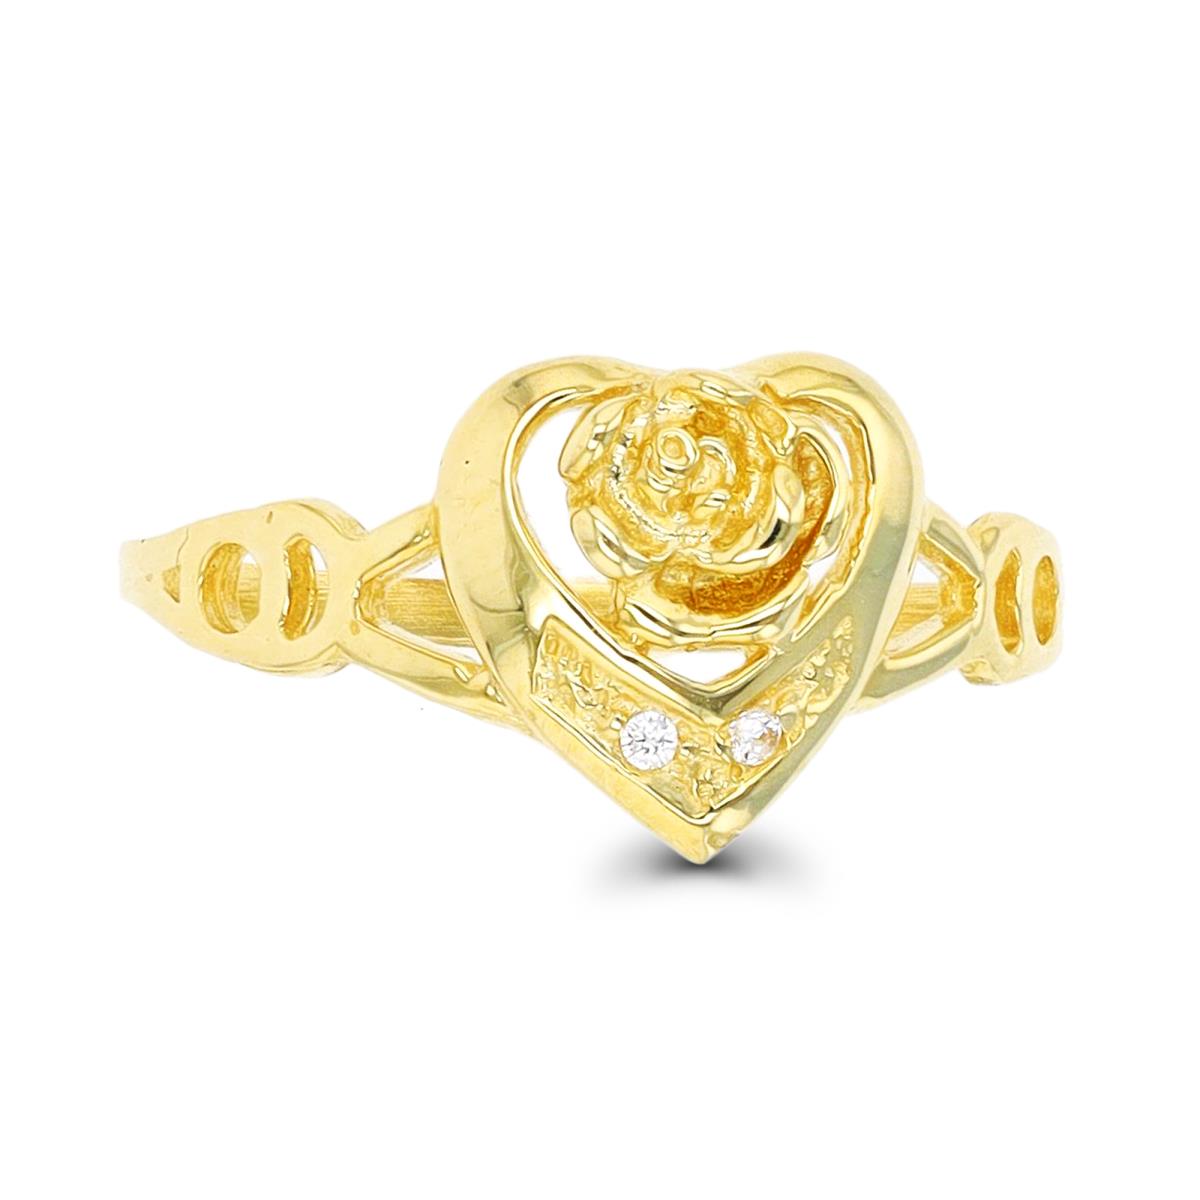 10K Yellow Gold Heart with Rose Fashion Ring